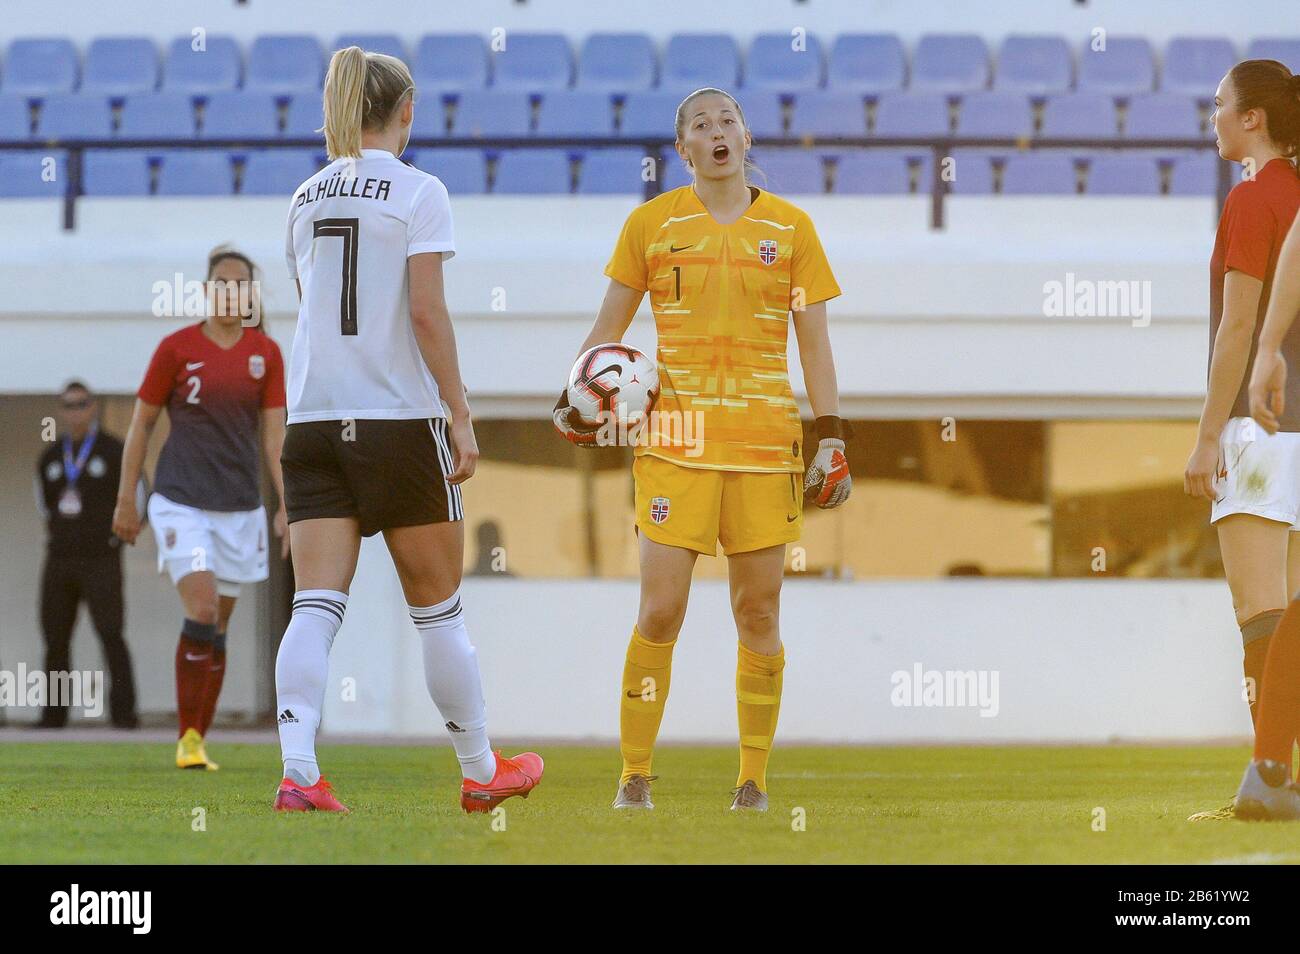 Lagos, Portugal. 07th Mar, 2020. LAGOS, PORTUGAL: MAR 7TH Norwegian goalkeeper Cecilie Haustaker Fiskerstrand (1) pictured during the female football game between the national teams of Germany and Norway on the second matchday of the Algarve Cup 2020, a prestigious friendly womensoccer tournament in Portugal STIJN AUDOOREN/SPP-Sportpix Credit: SPP Sport Press Photo. /Alamy Live News Stock Photo